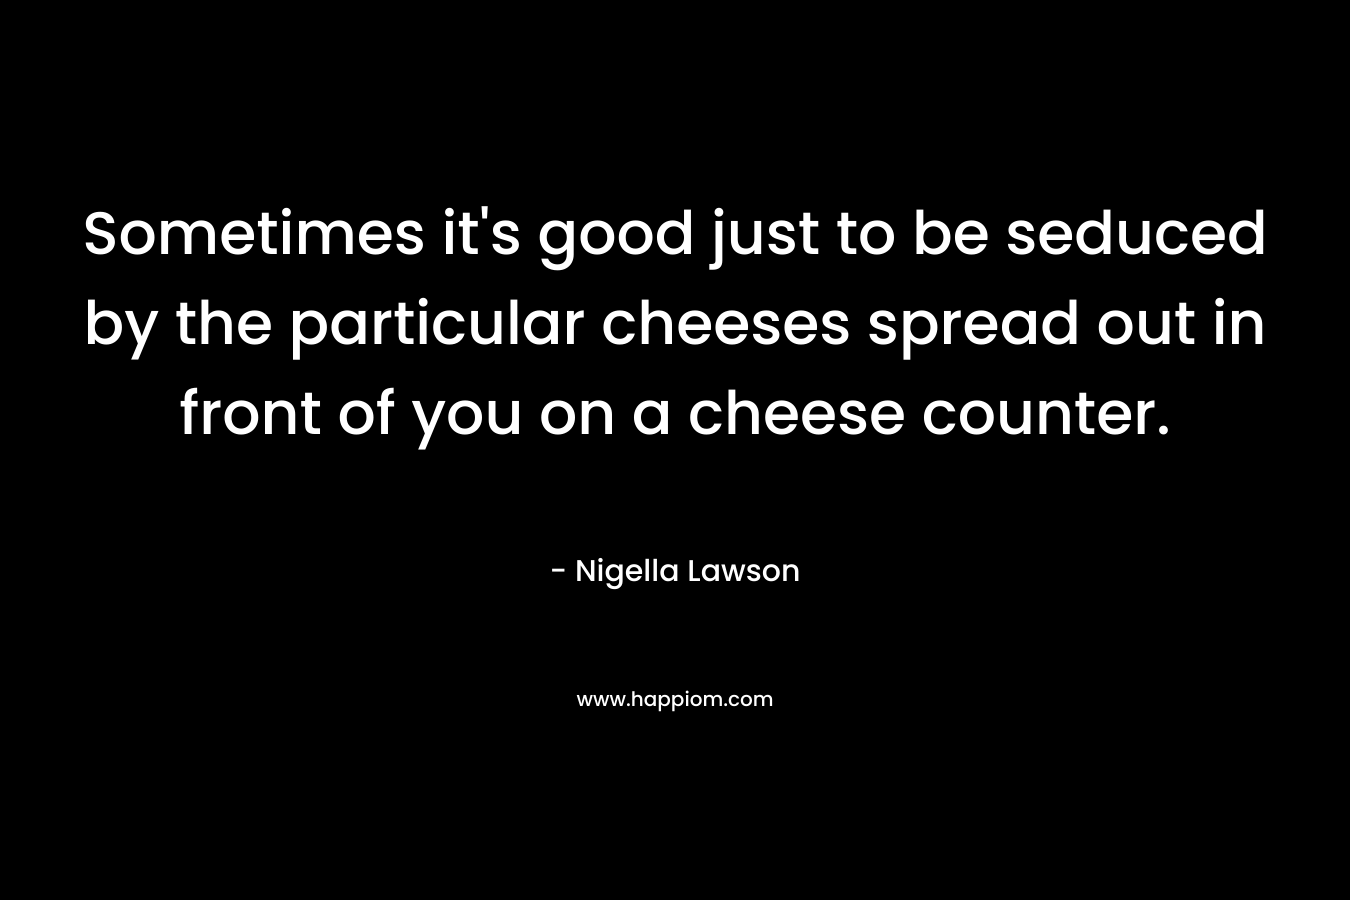 Sometimes it’s good just to be seduced by the particular cheeses spread out in front of you on a cheese counter. – Nigella Lawson